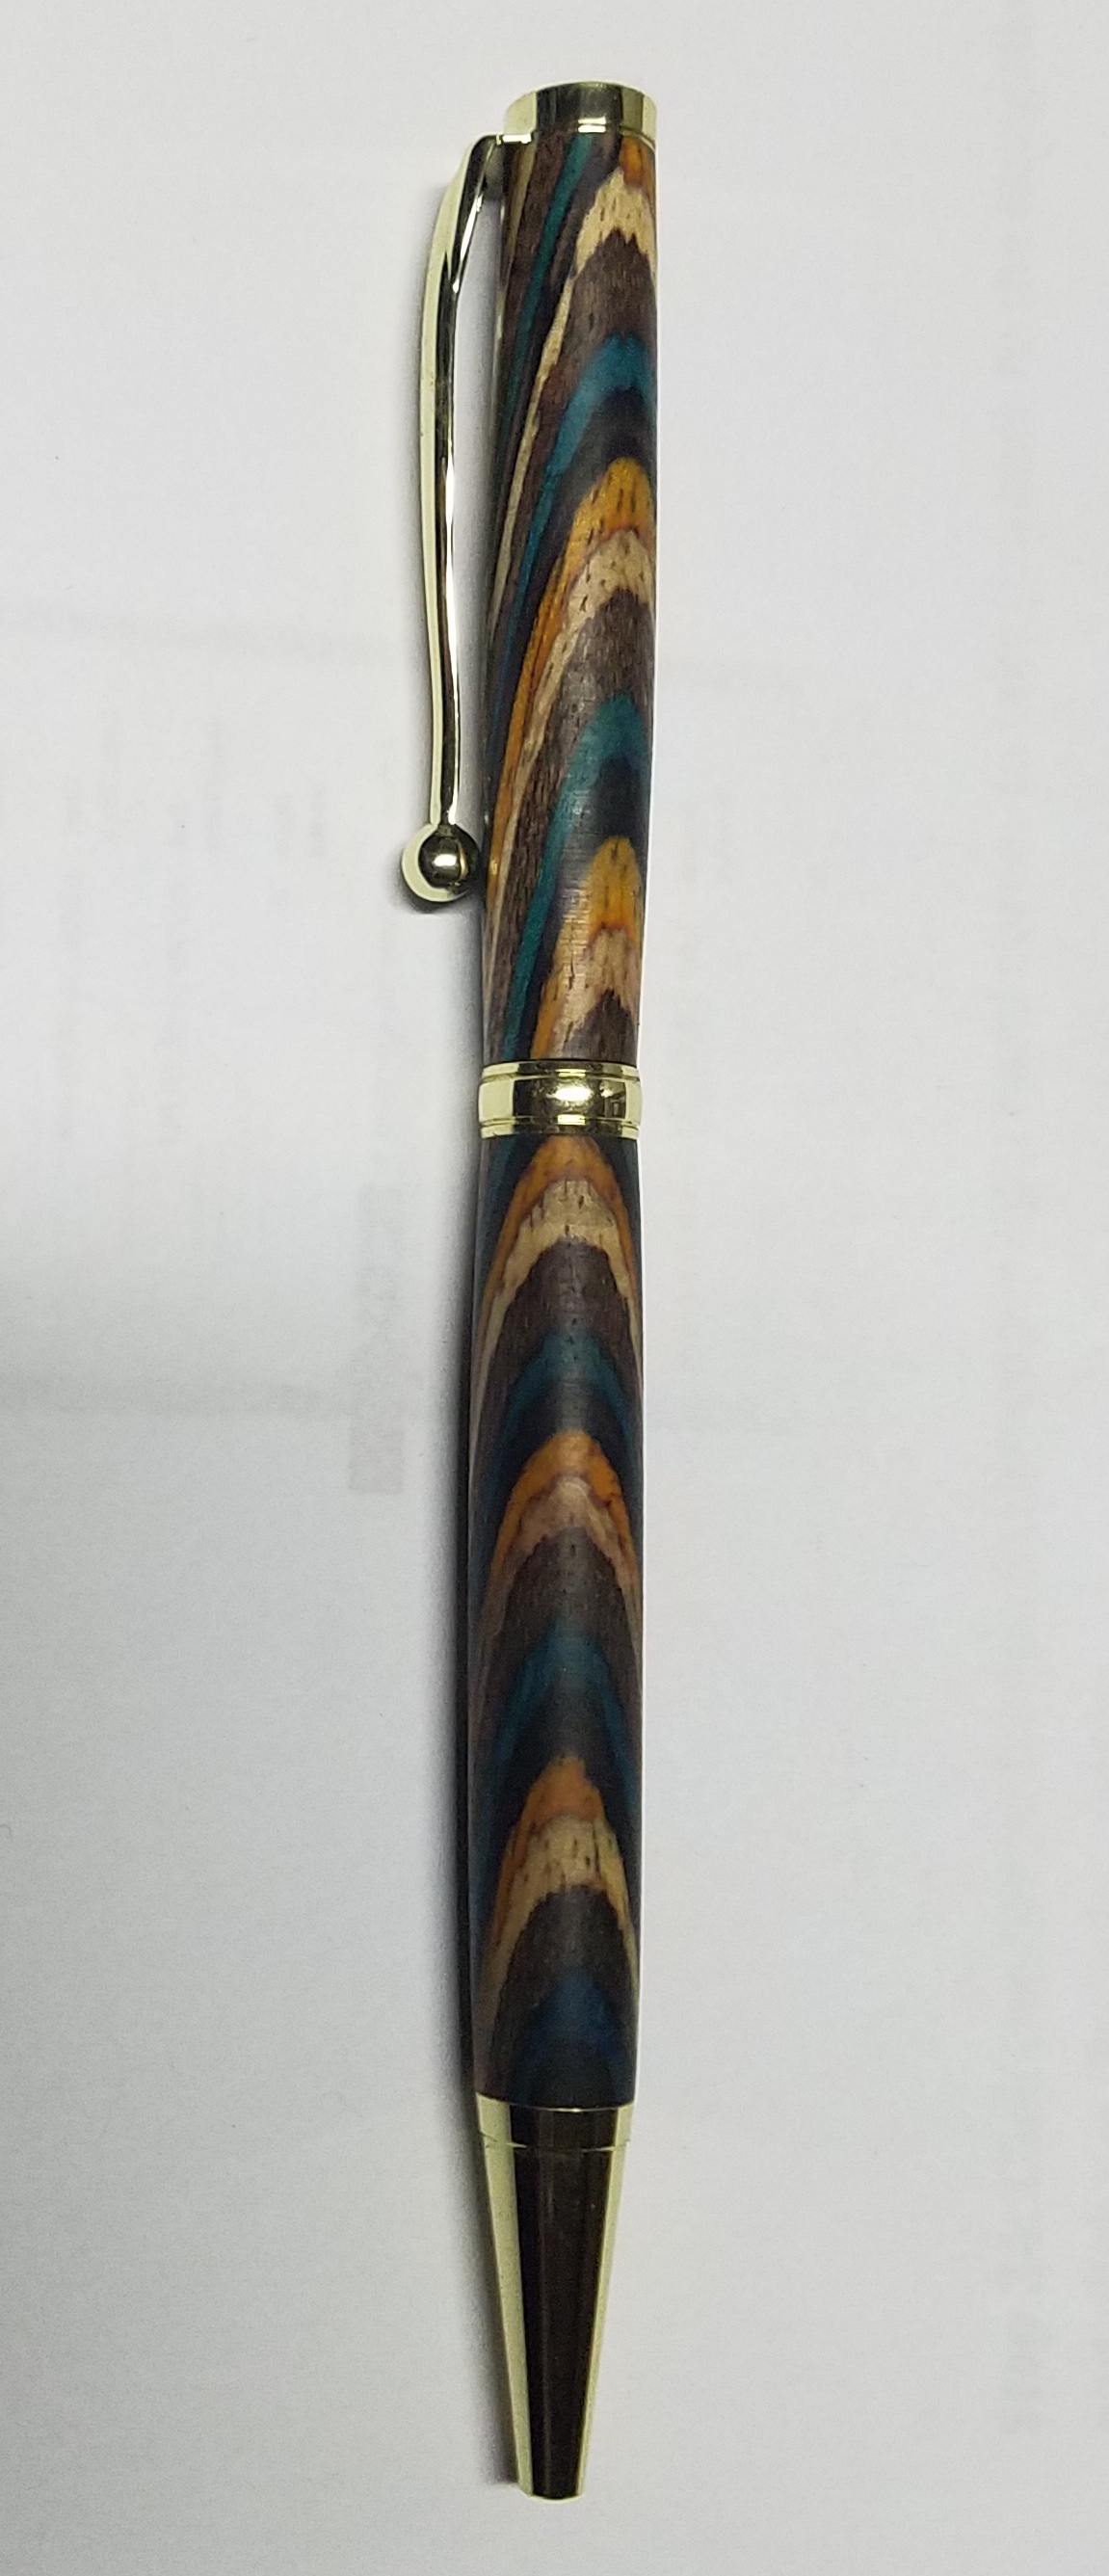 My first and 5th pen...